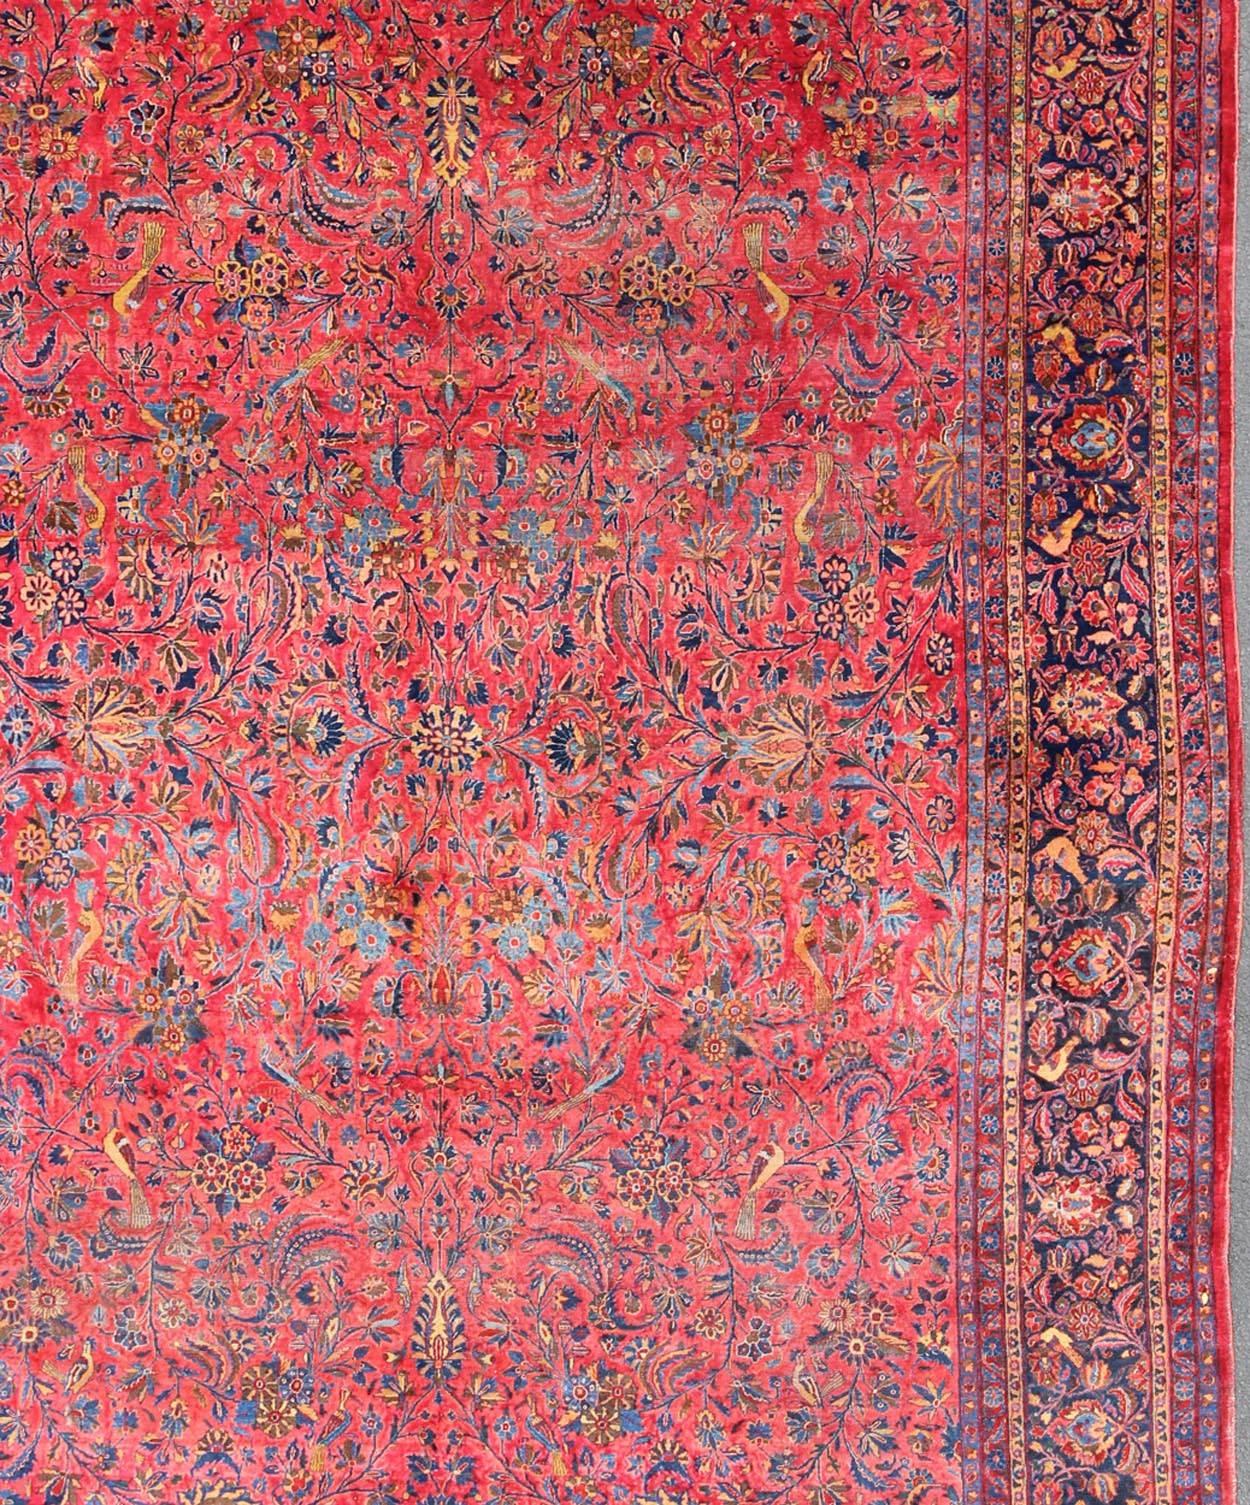 Hand-Woven Antique Persian Kashan Rug With a All-Over Design On A Red Field and Blue Border For Sale